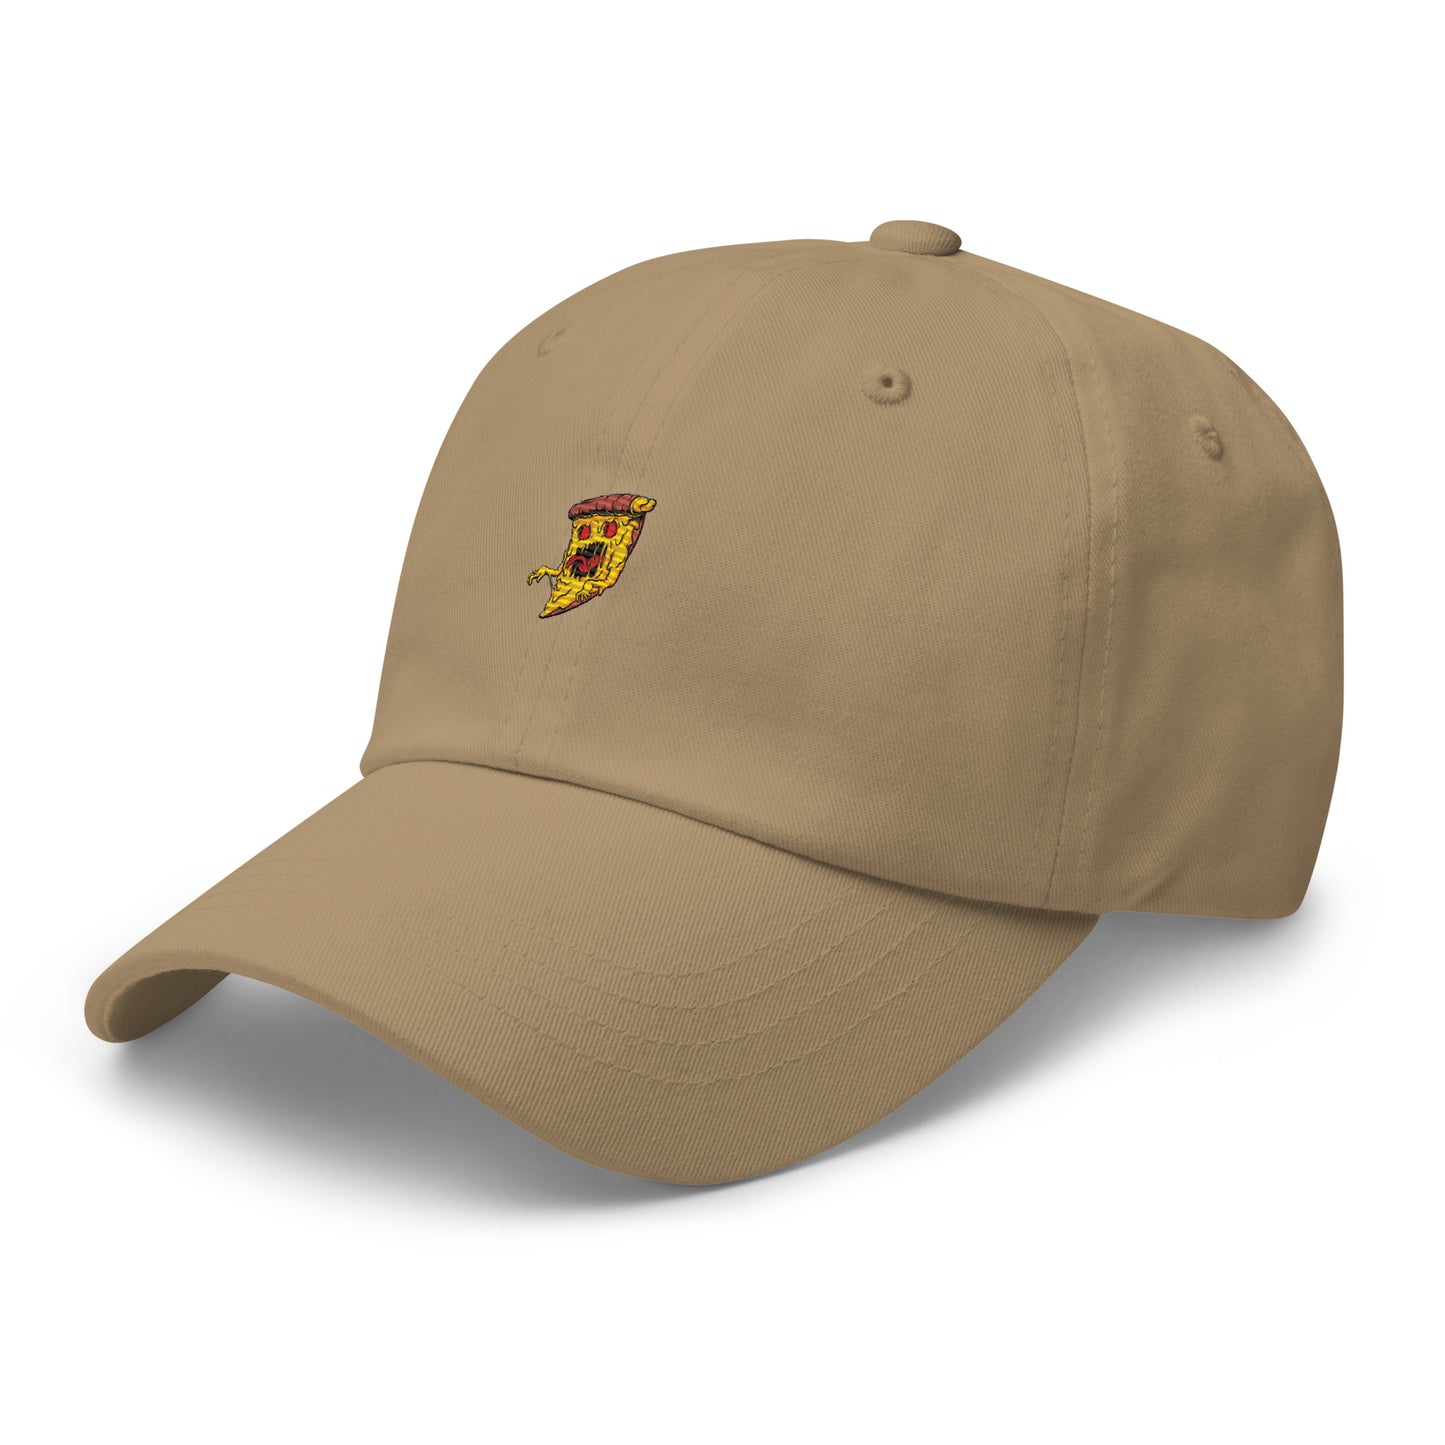 Dad Cap with Pizza Monster Symbol